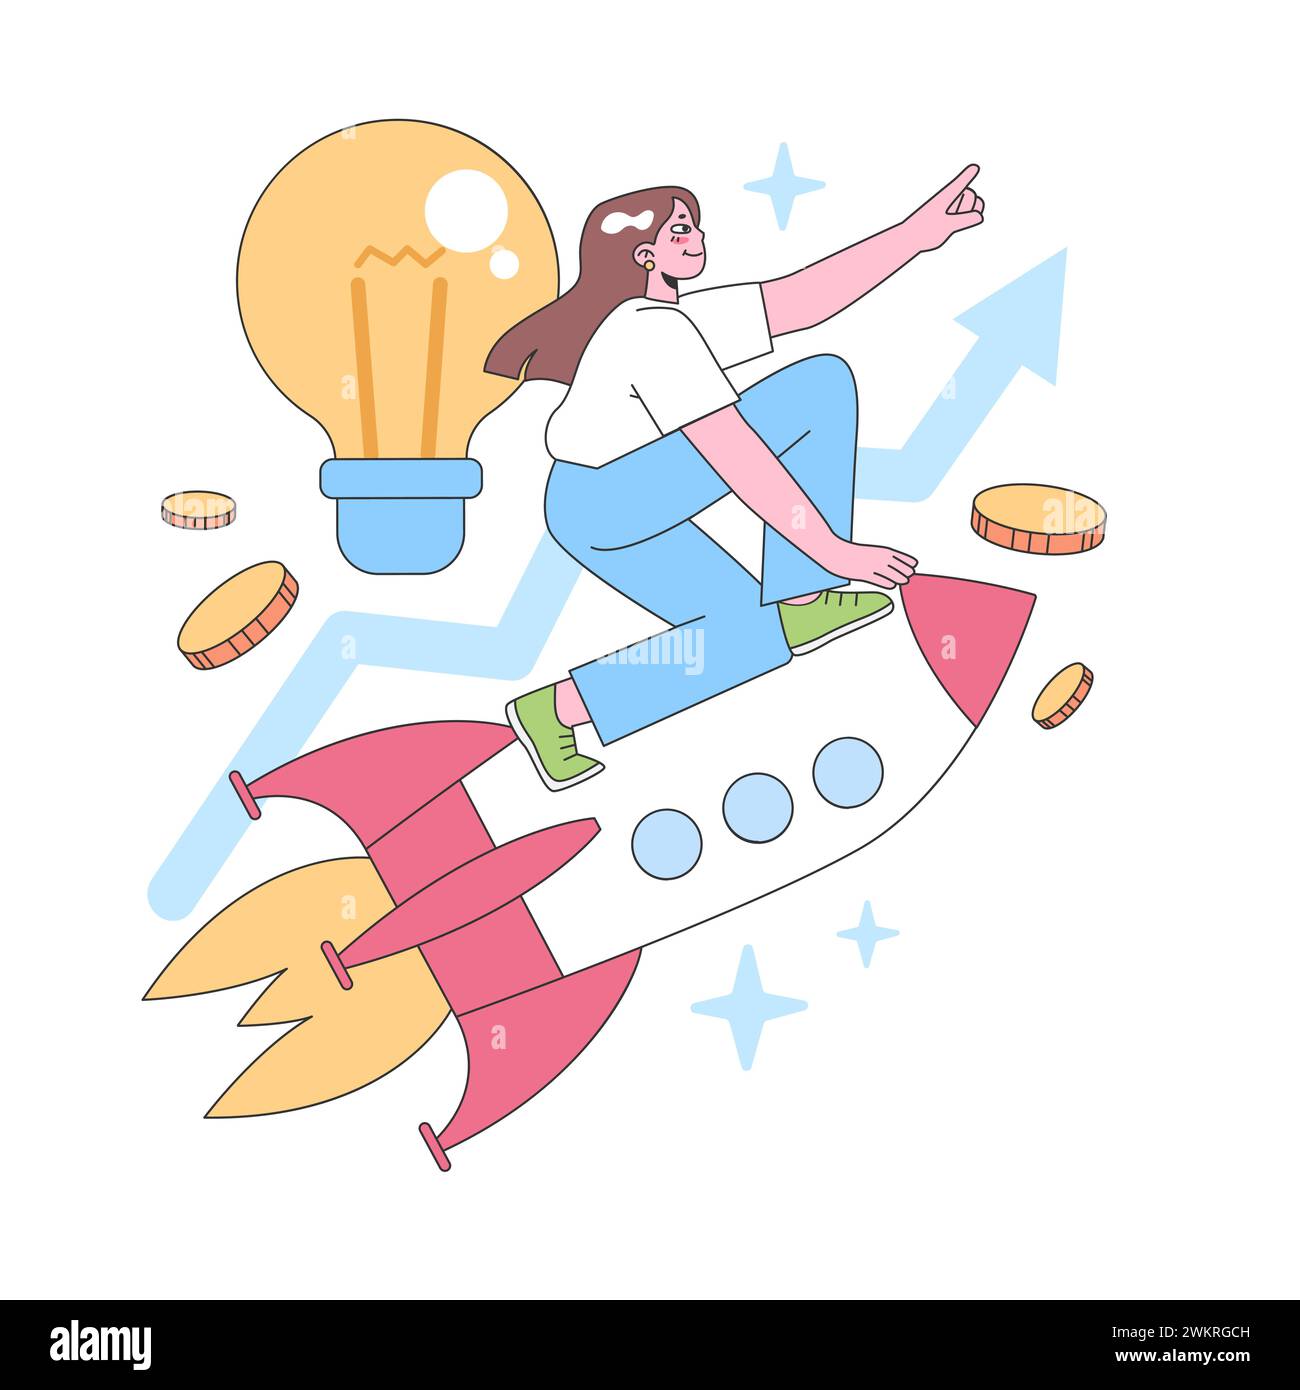 Innovation Journey concept. Energetic woman riding a rocket, guiding it toward success with a giant light bulb illuminating her path, surrounded by soaring coins and rising graphs. vector illustration Stock Vector